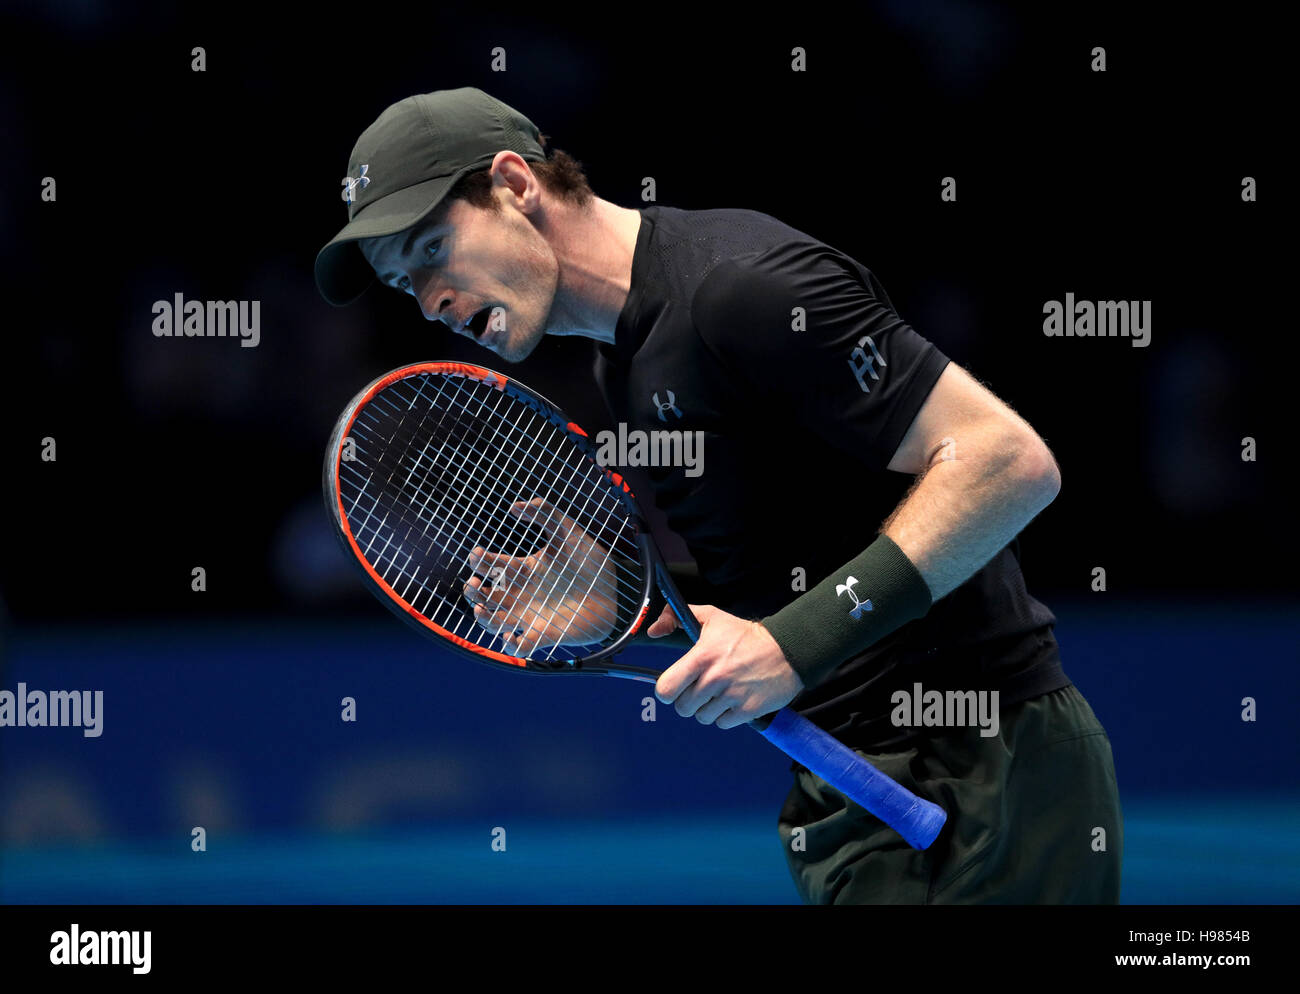 Andy Murray in his match against Milos Raonic during day seven of the Barclays ATP World Tour Finals at The O2, London. PRESS ASSOCIATION Photo. Picture date: Saturday November 19, 2016. See PA story TENNIS London. Photo credit should read: Adam Davy/PA Wire. Stock Photo